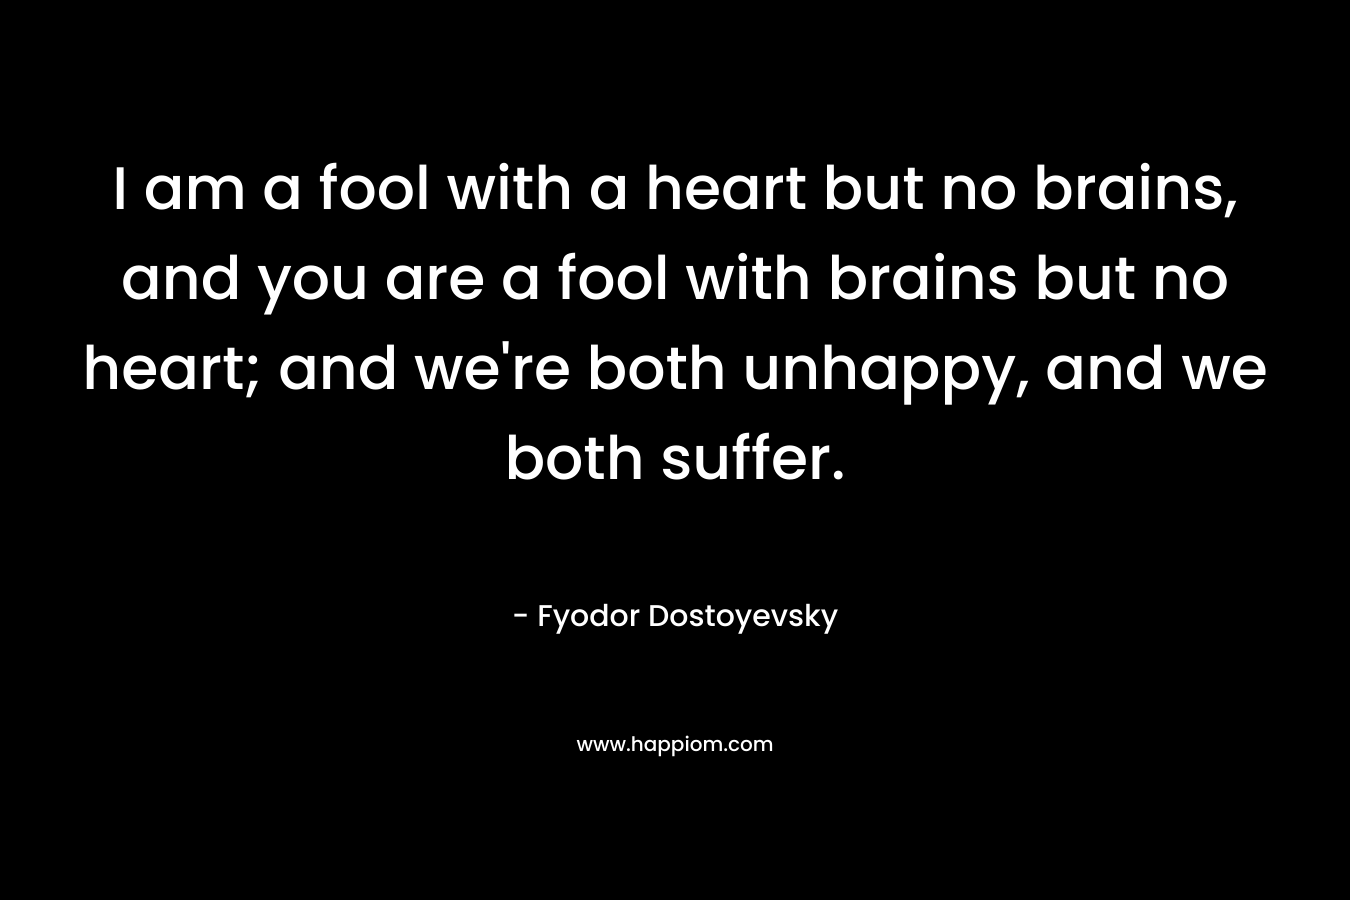 I am a fool with a heart but no brains, and you are a fool with brains but no heart; and we're both unhappy, and we both suffer.